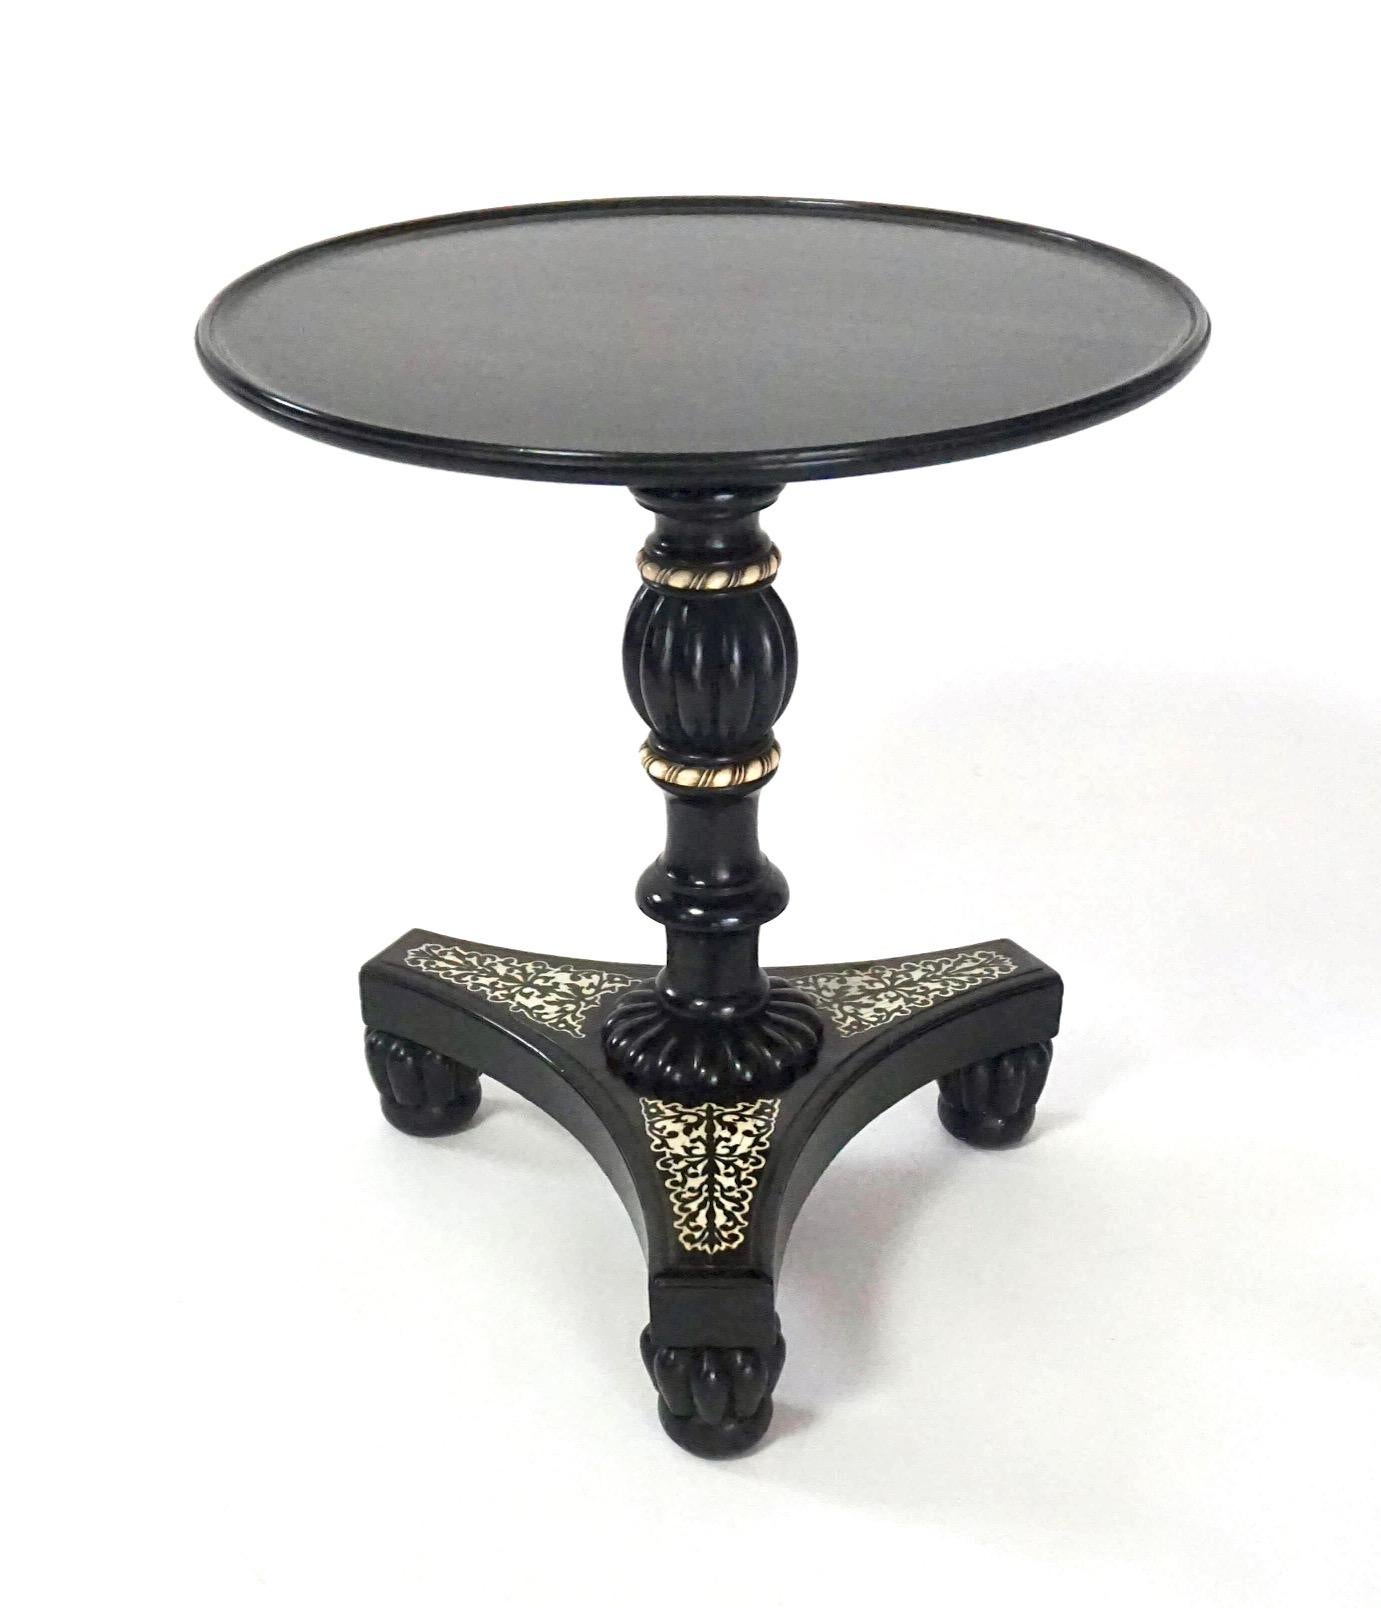 19th Century Anglo-Indian Bone Inlaid Ebony Petite Occasional Table or Stand, circa 1840